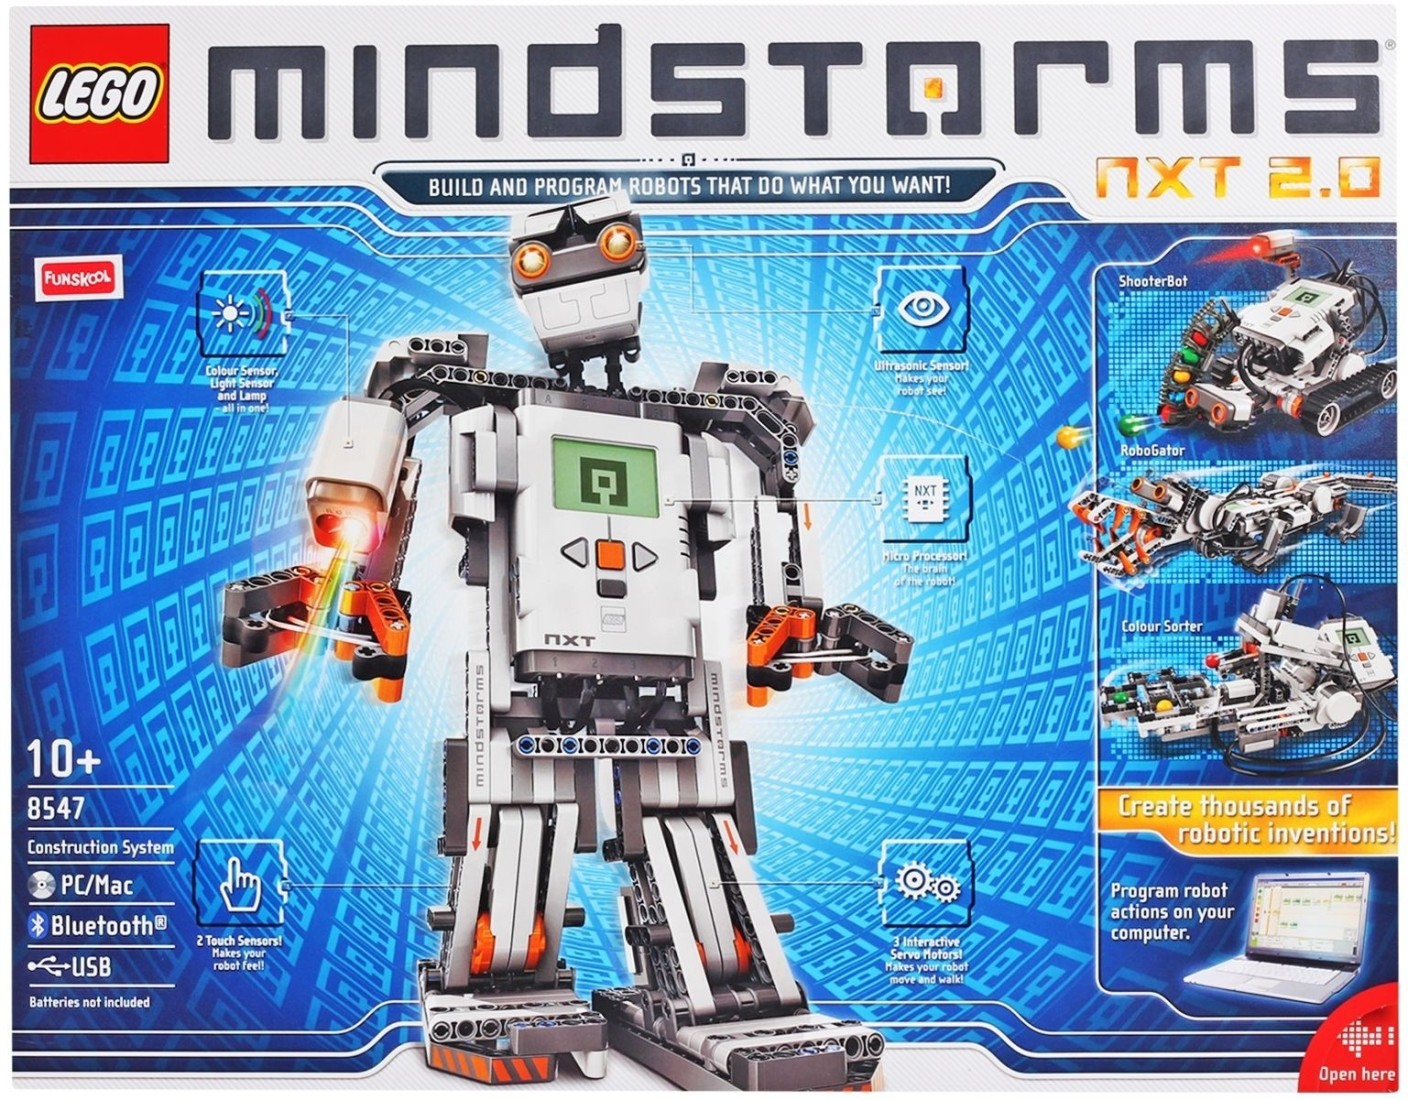 Lego Mindstorms NXT 2.0 - Mindstorms NXT 2.0 . shop for Lego products